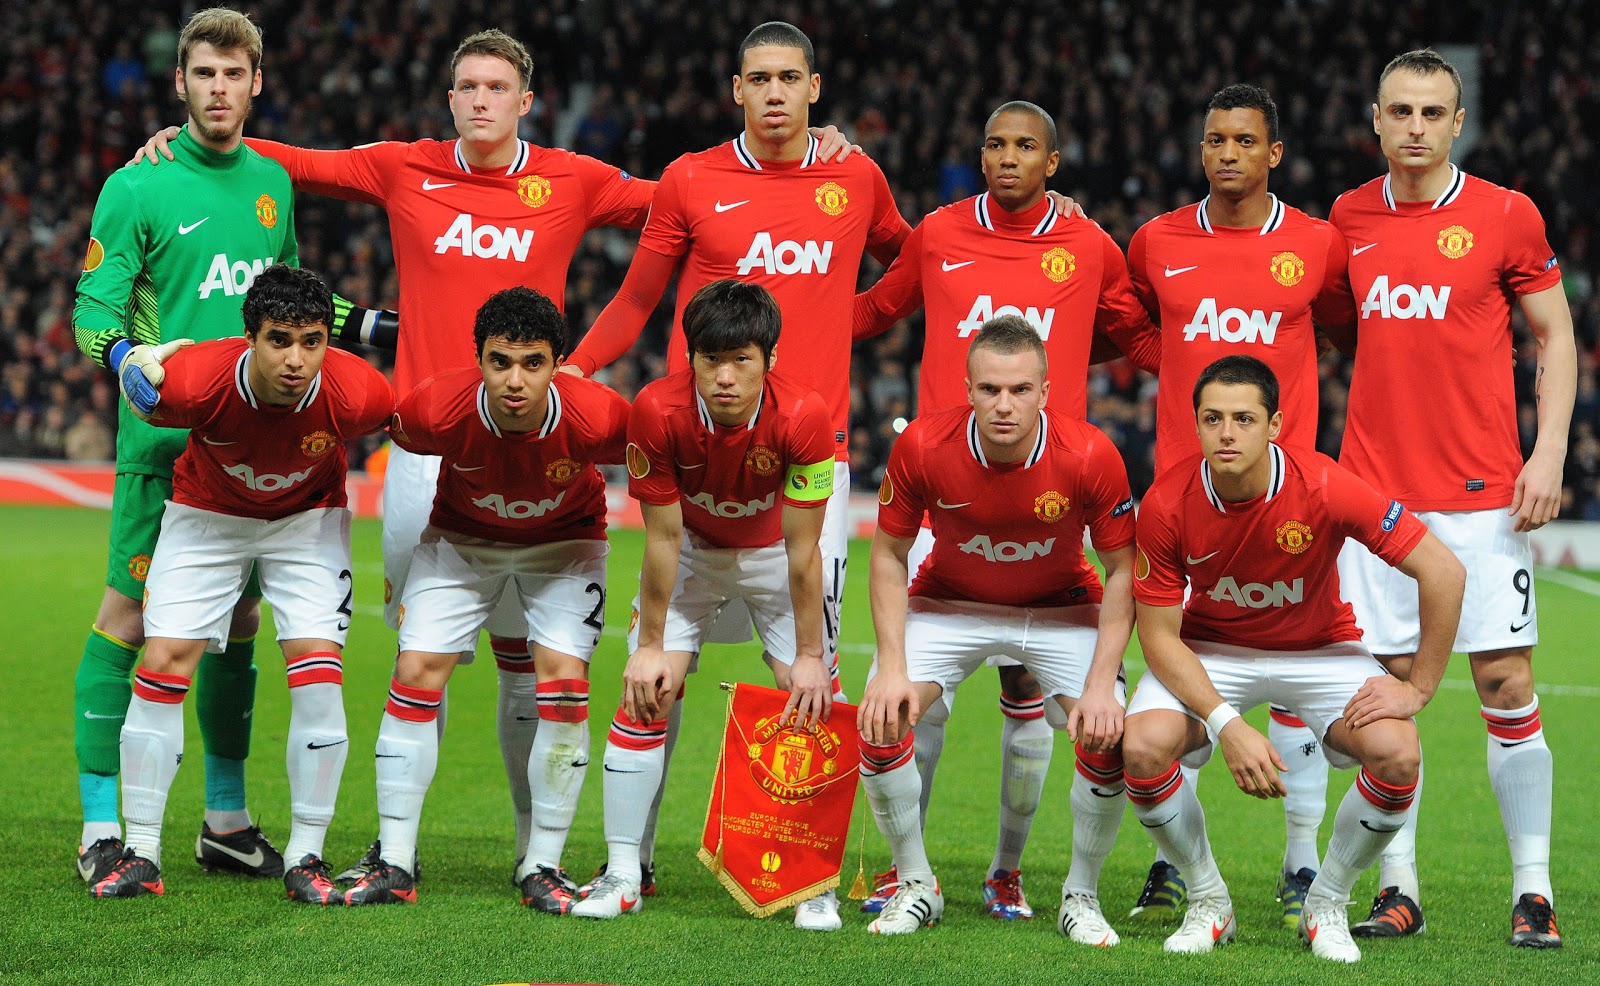 All Football Players: Manchester United Team 2012